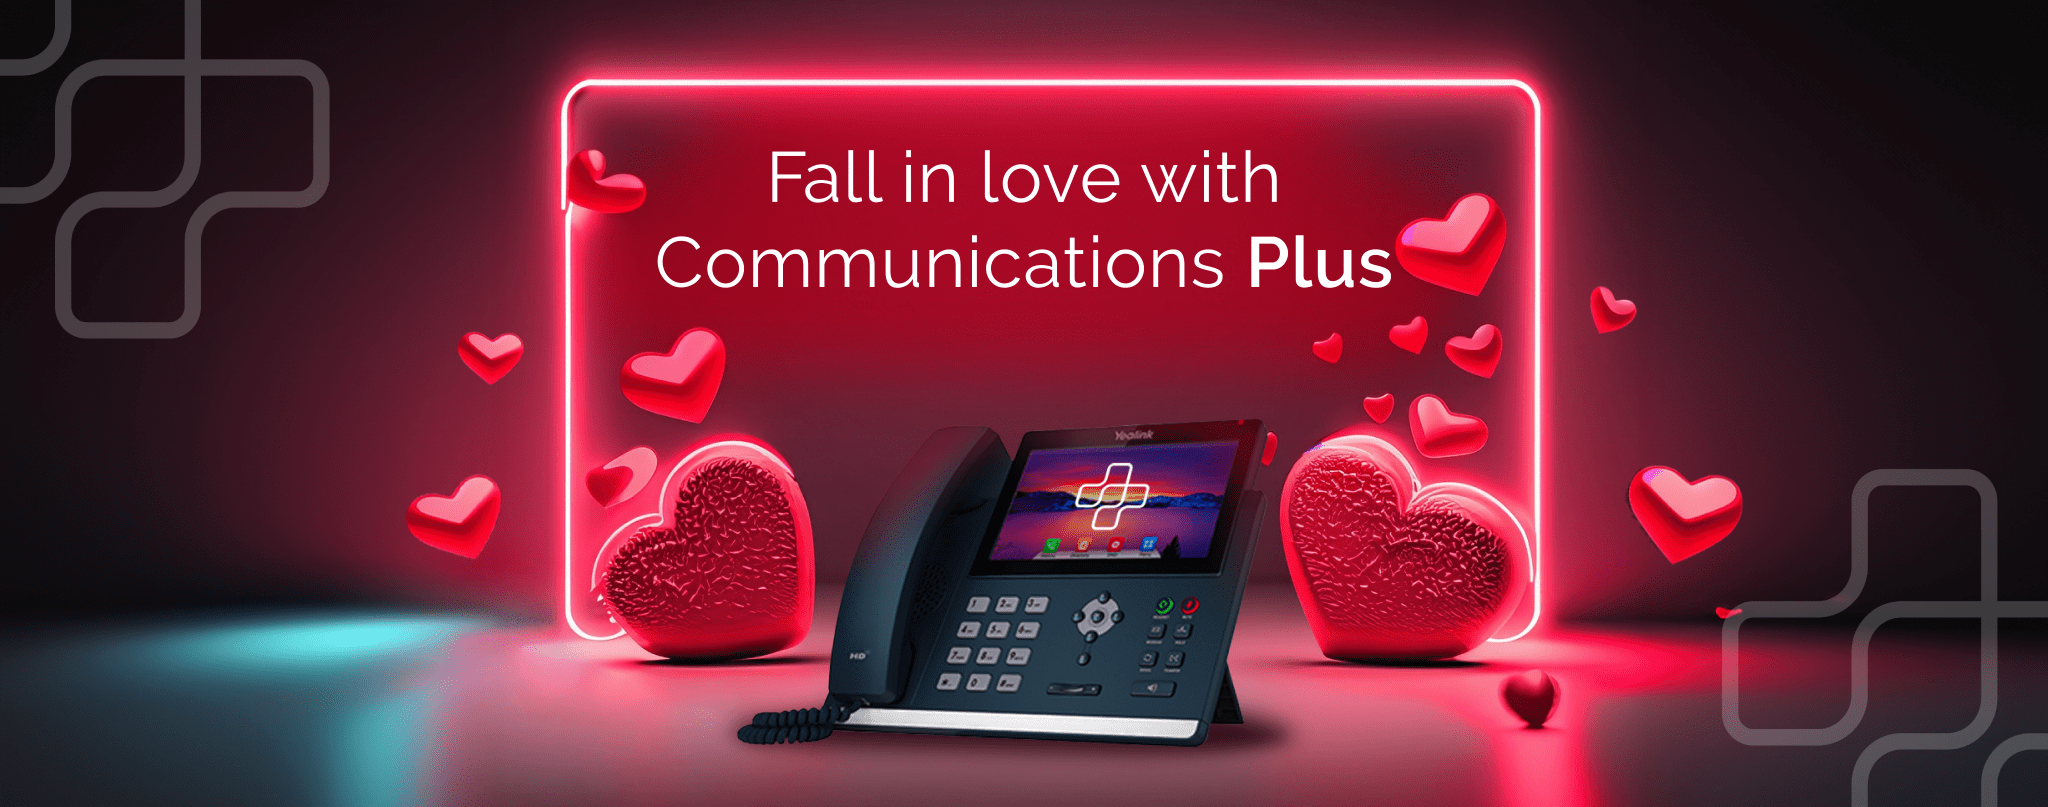 Valentines Day Blog VoIP Image with hearts